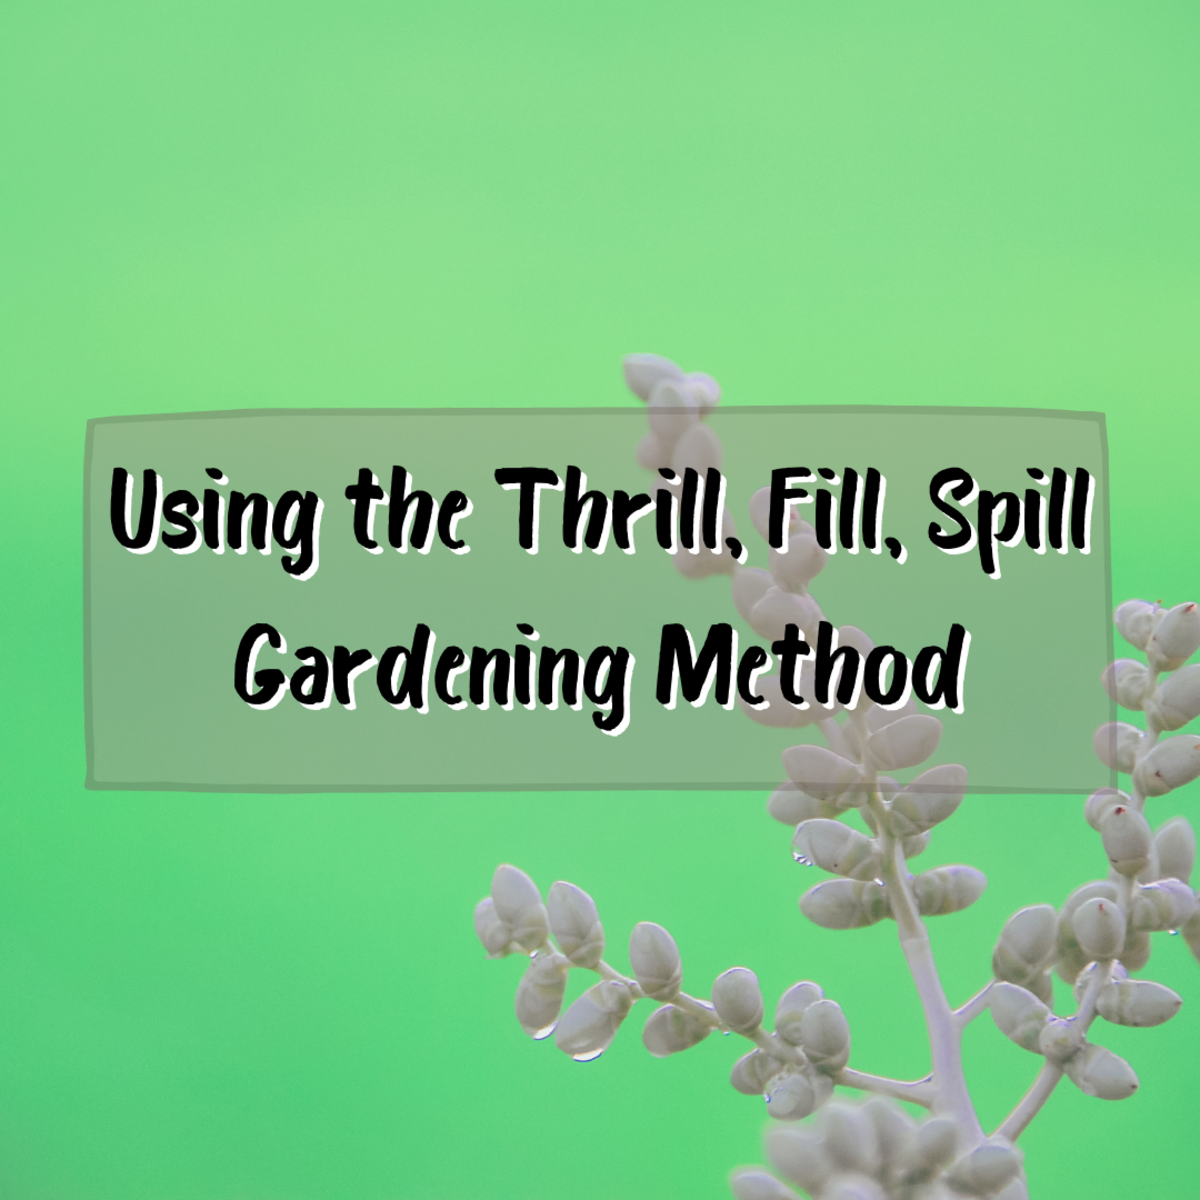 This article will provide information on the "thrill, fill, and spill" method of container gardening made famous by "Better Homes and Gardens."